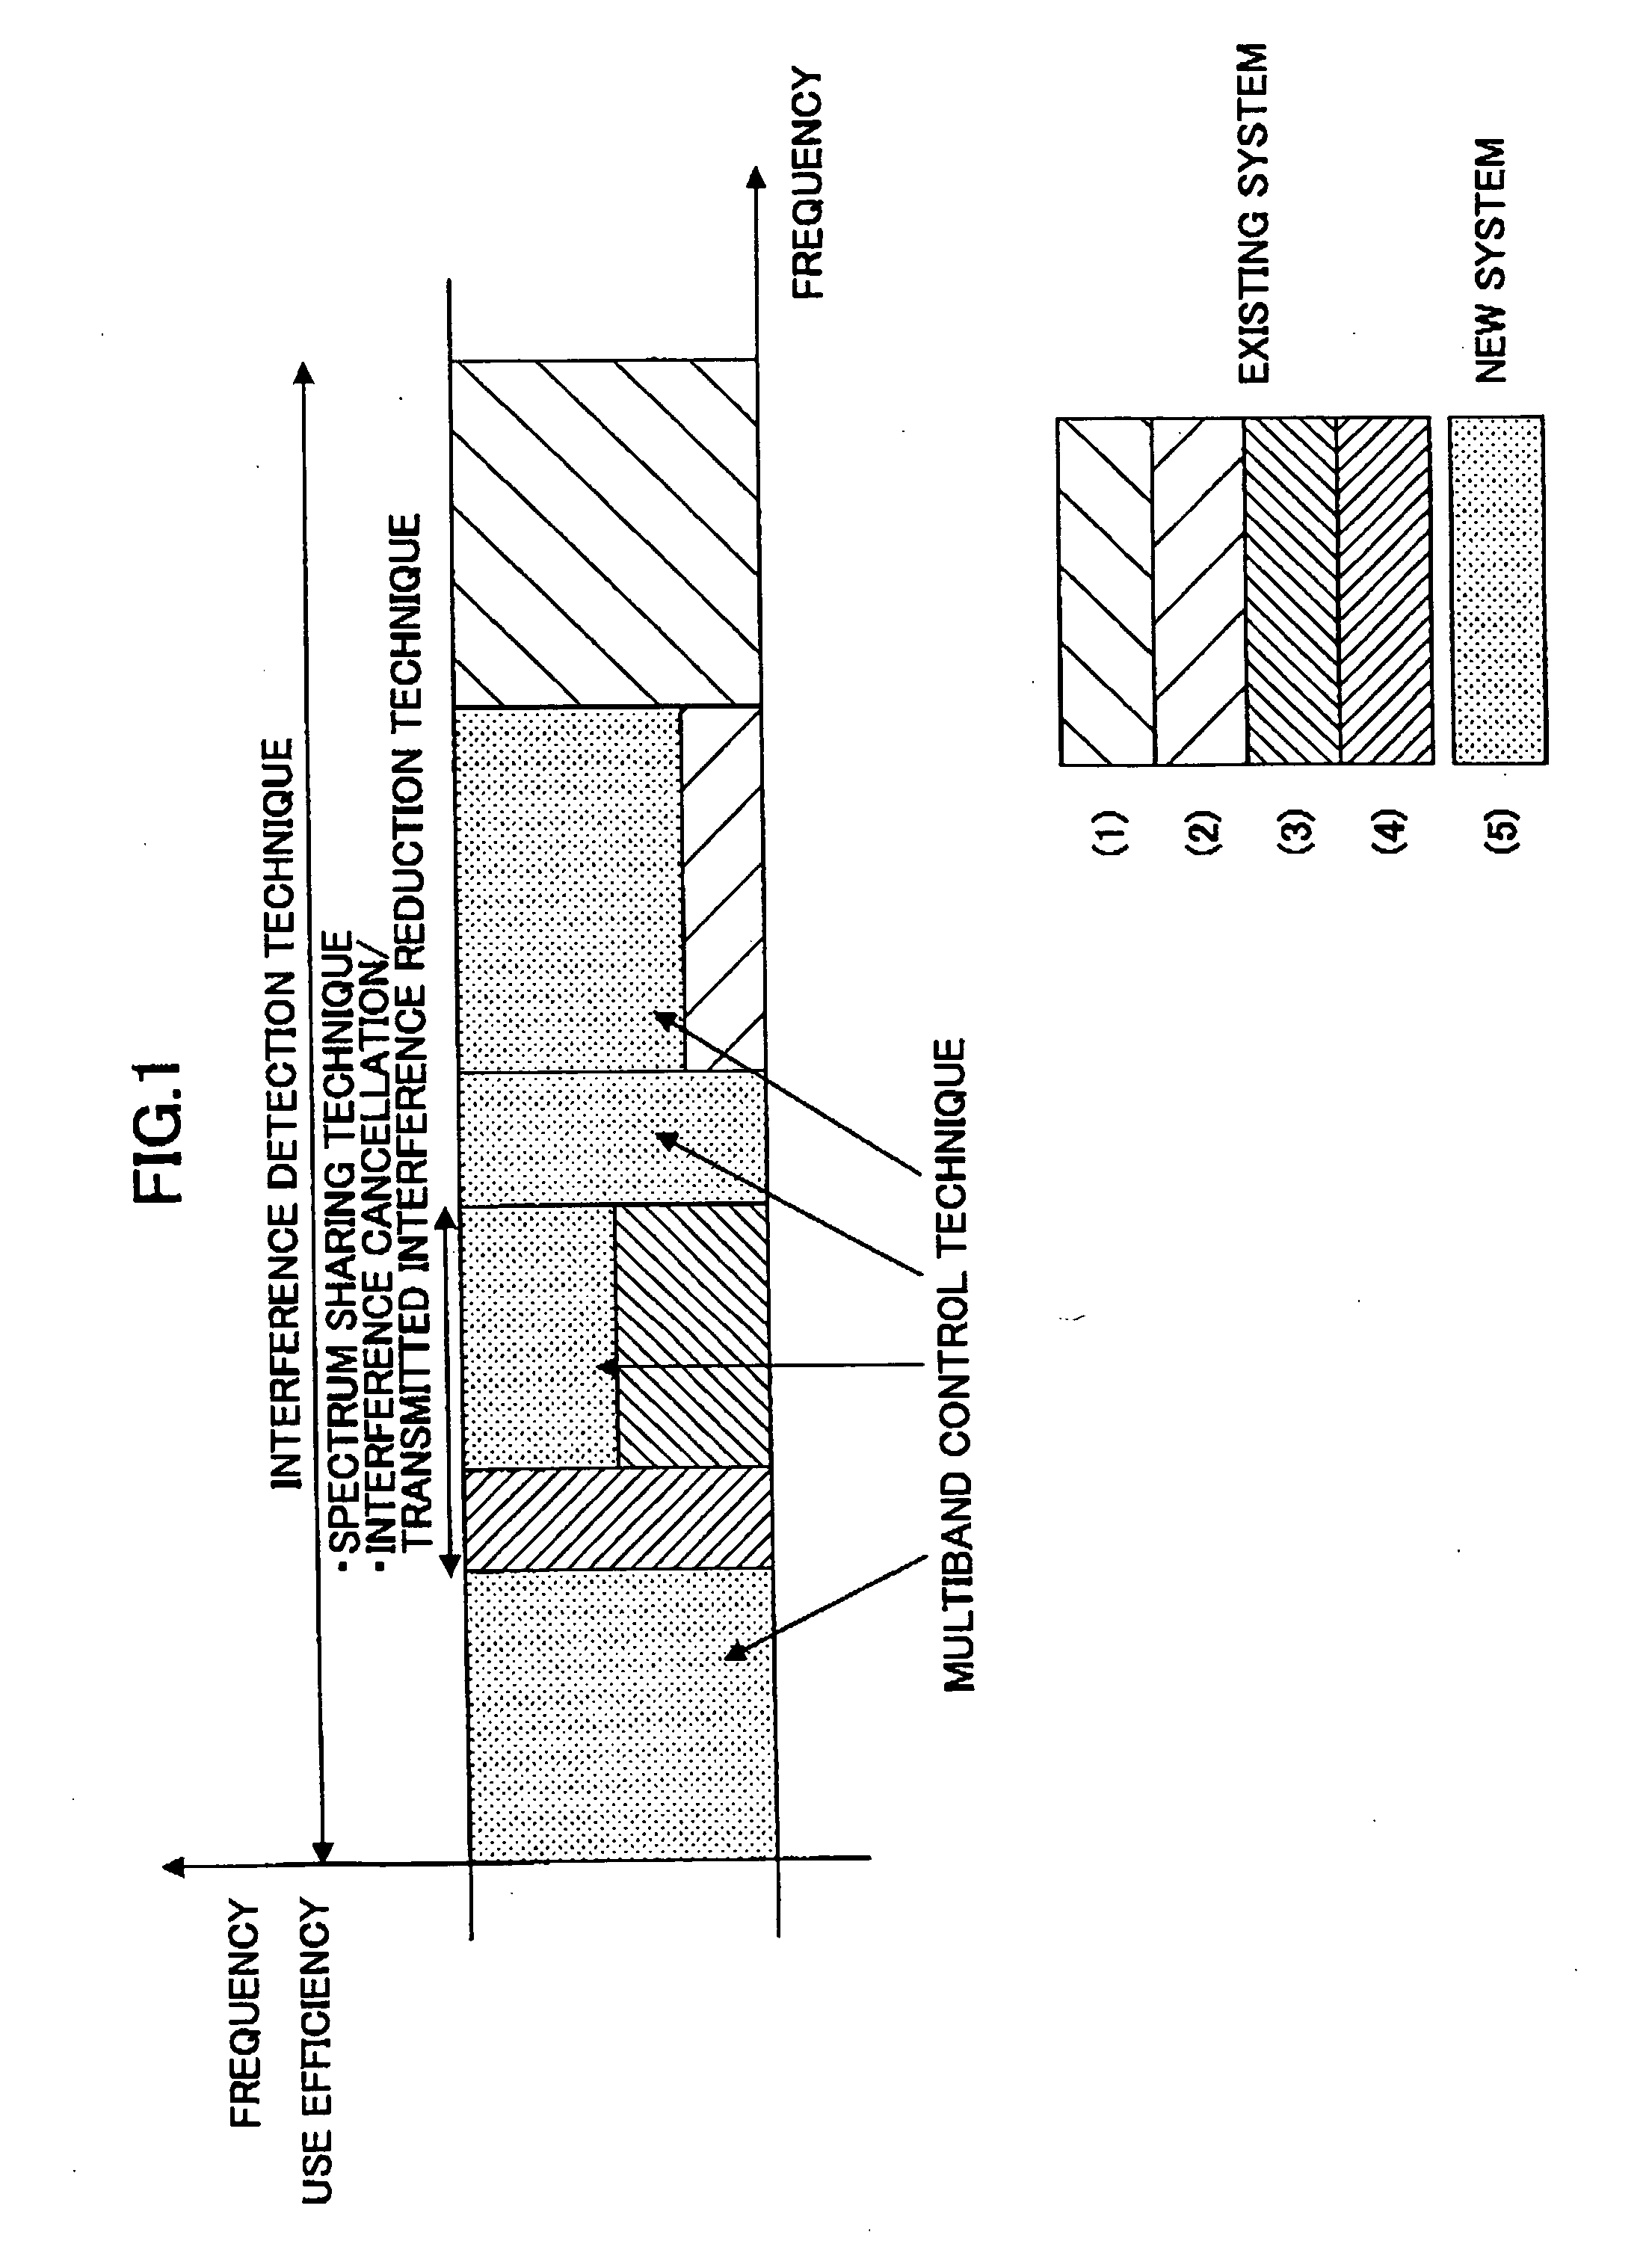 Multiband mobile communication system and transmitter used therein